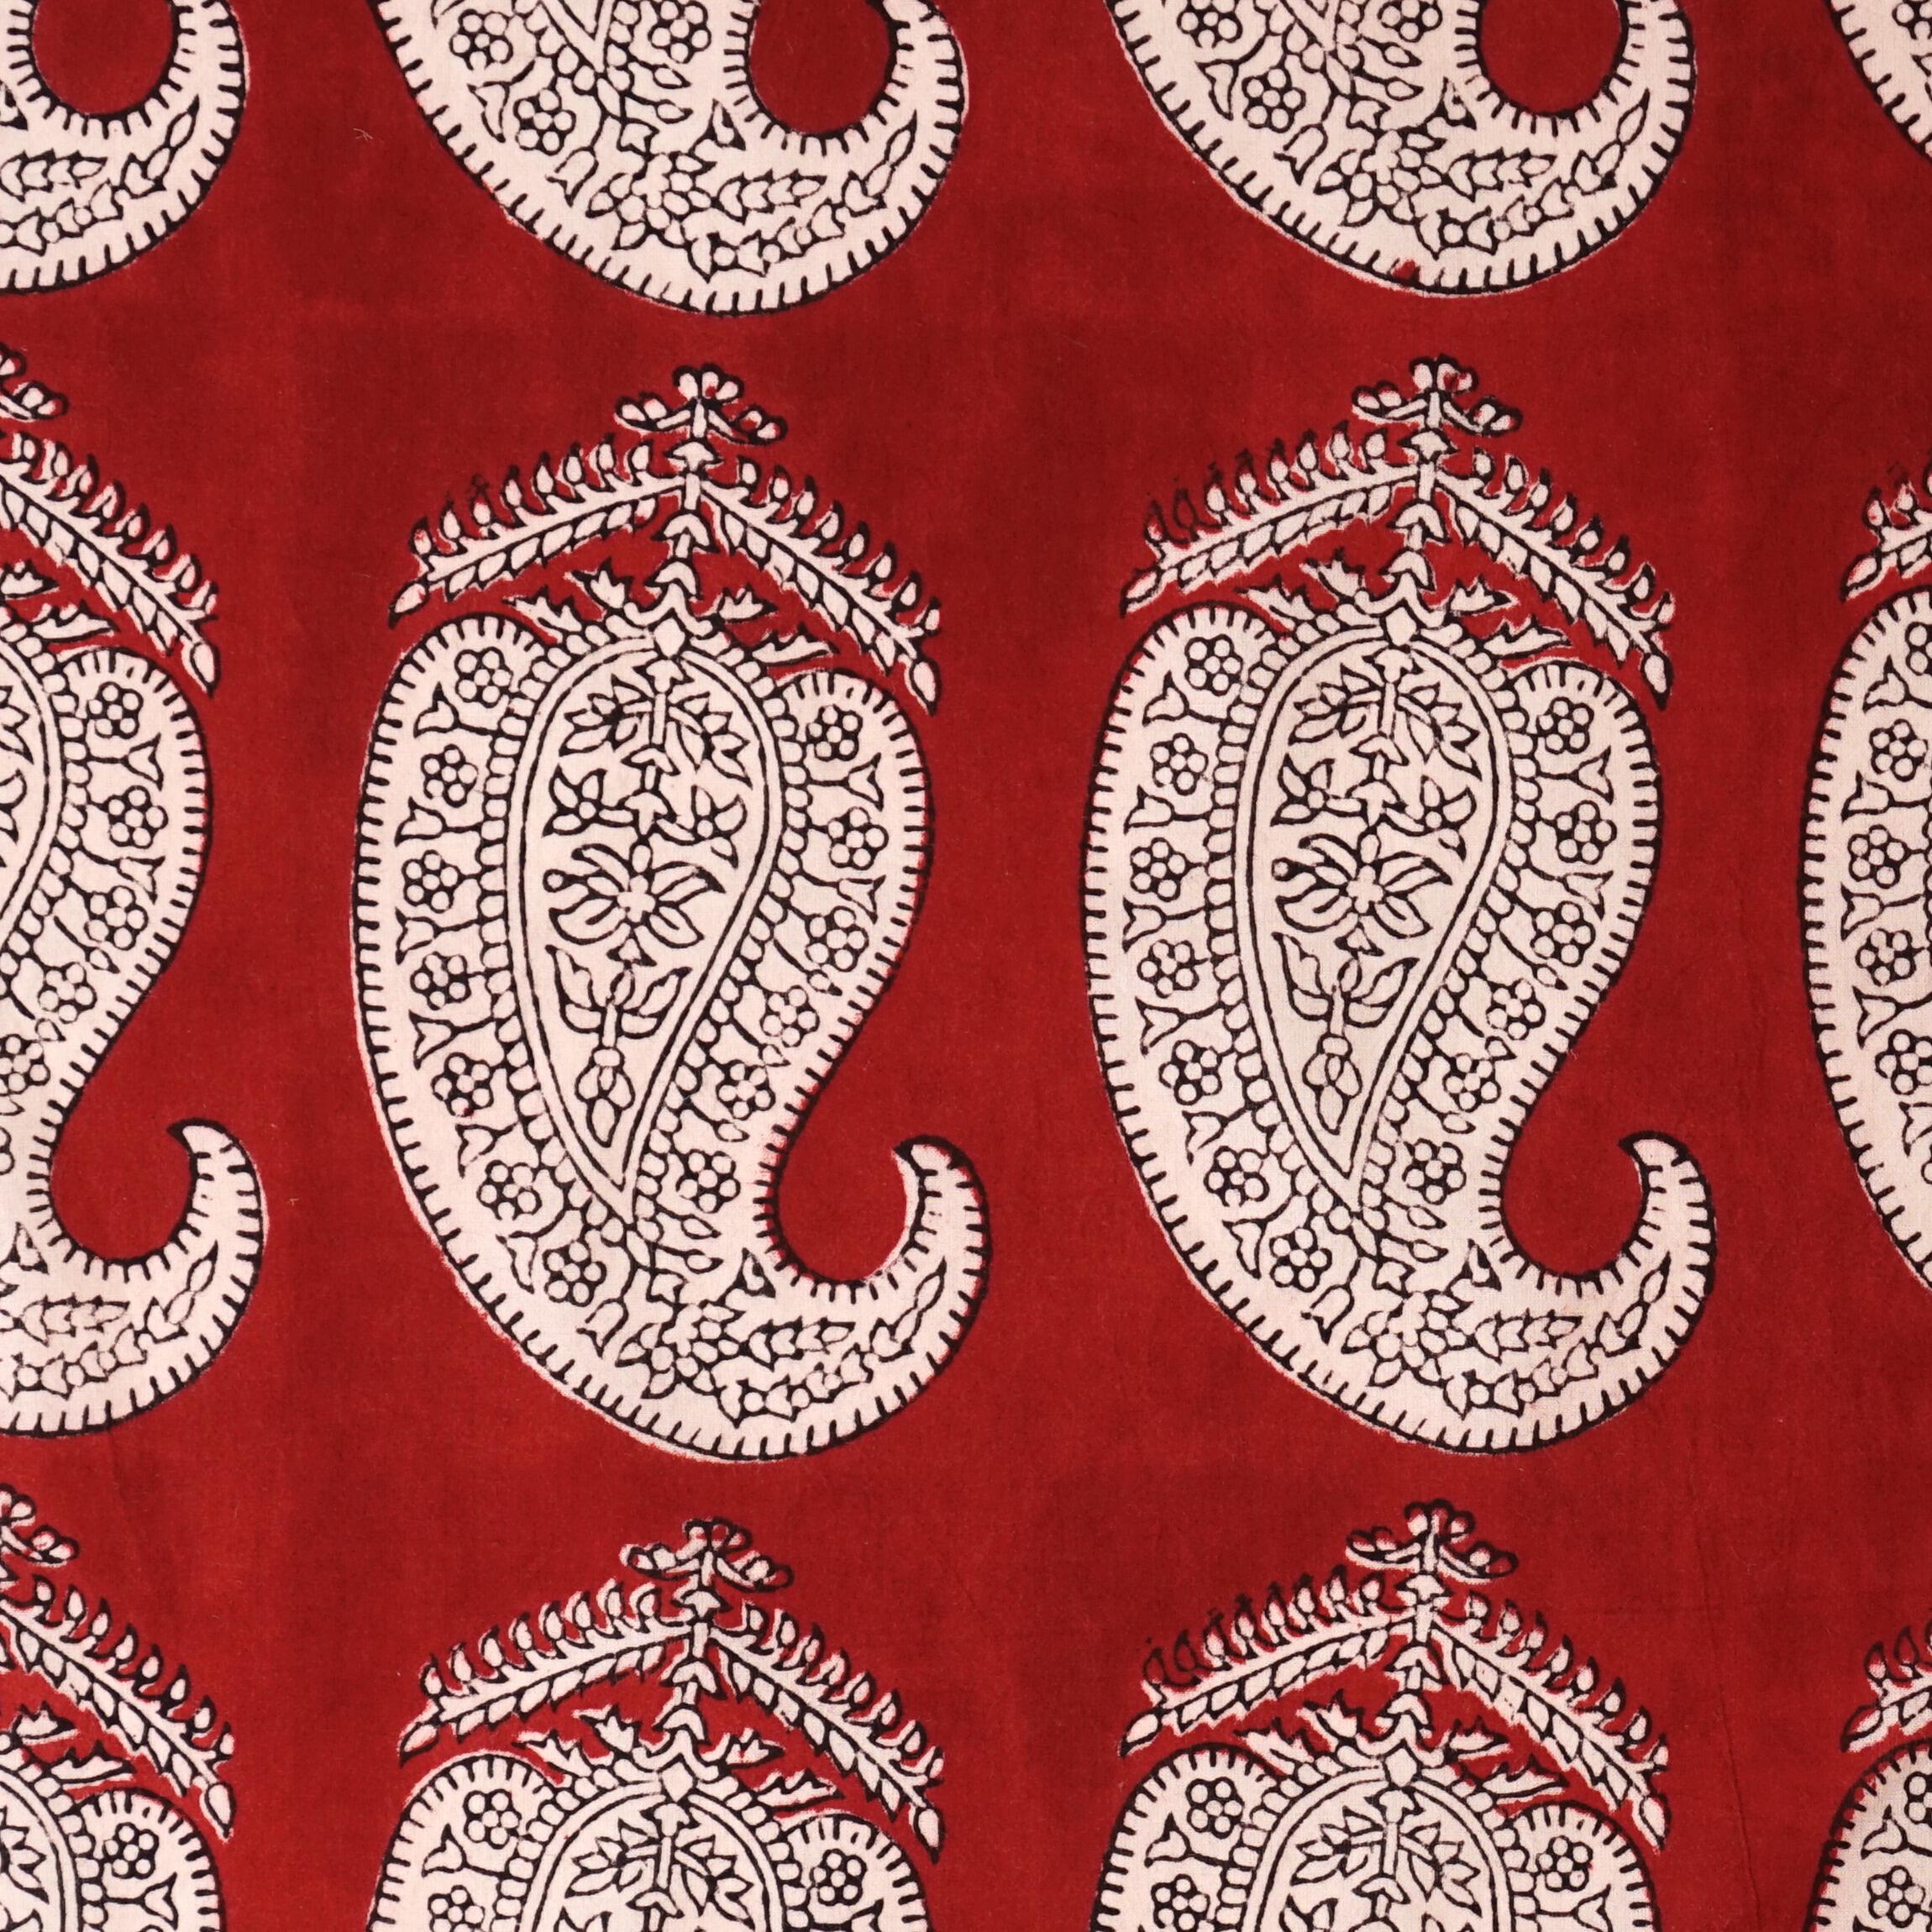 100% Block-Printed Cotton Fabric From India - Breadfruit Design - Iron Rust Black & Alizarin Red Dyes - Flat